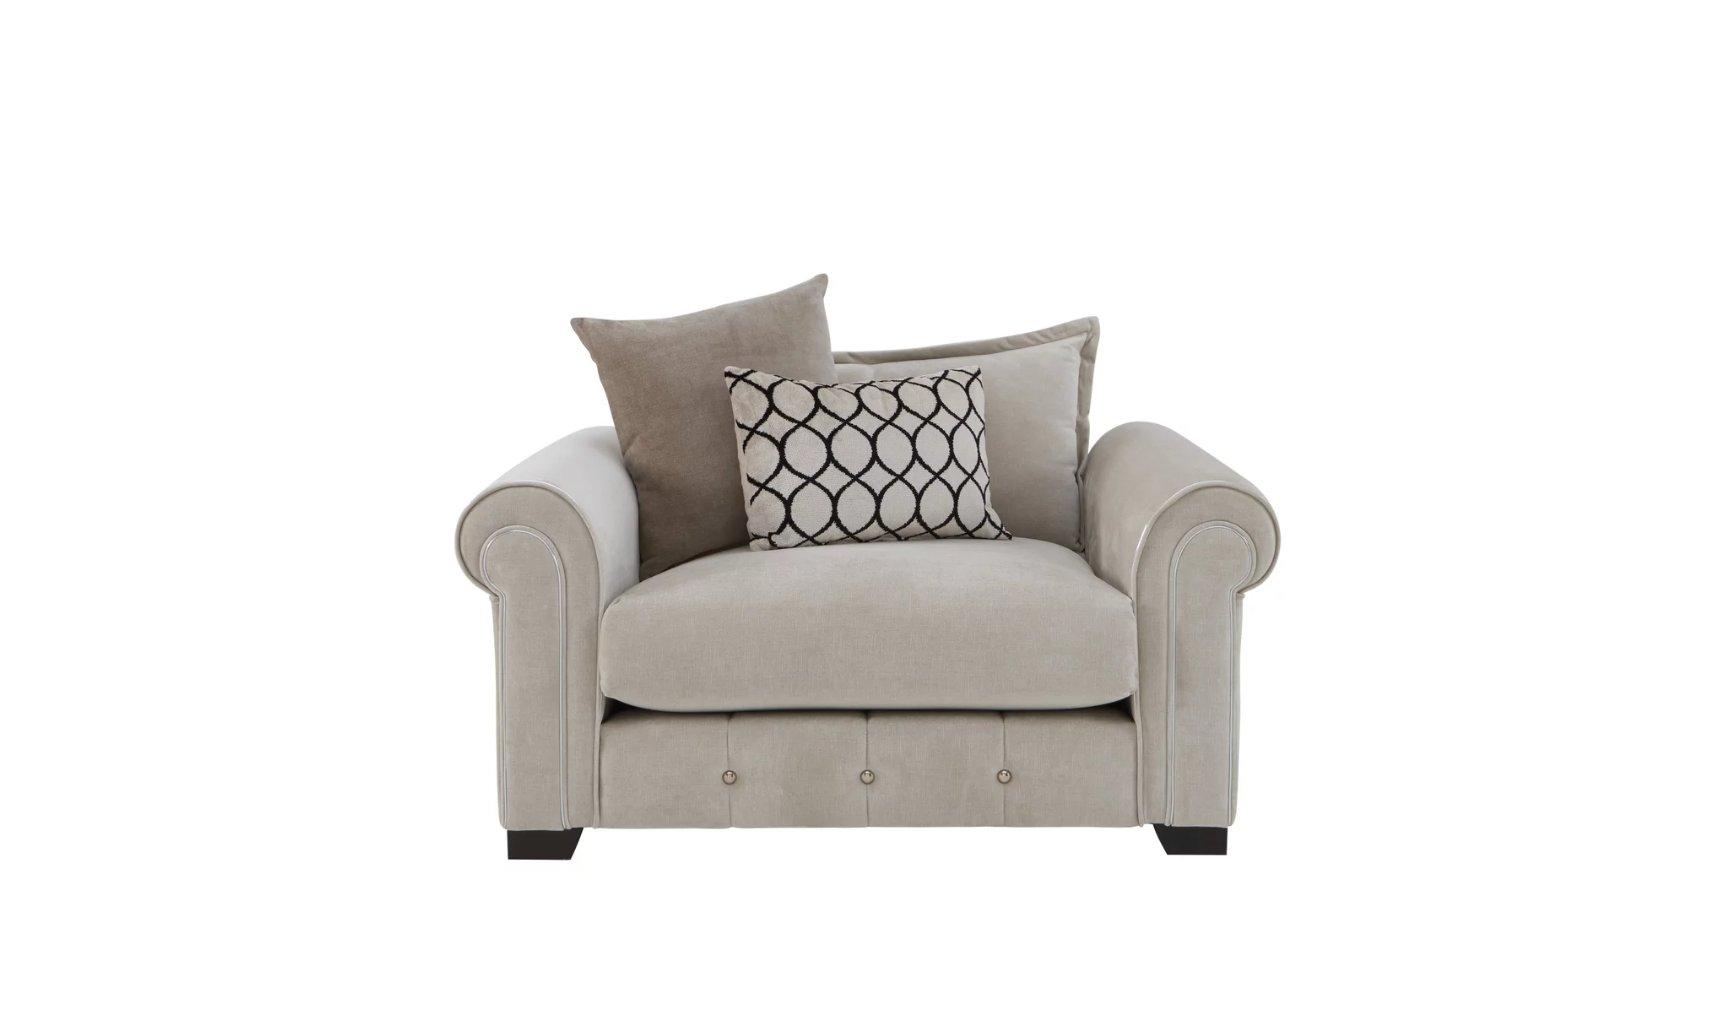 Sumptuous Fabric Snuggler Chair in  on Furniture Village